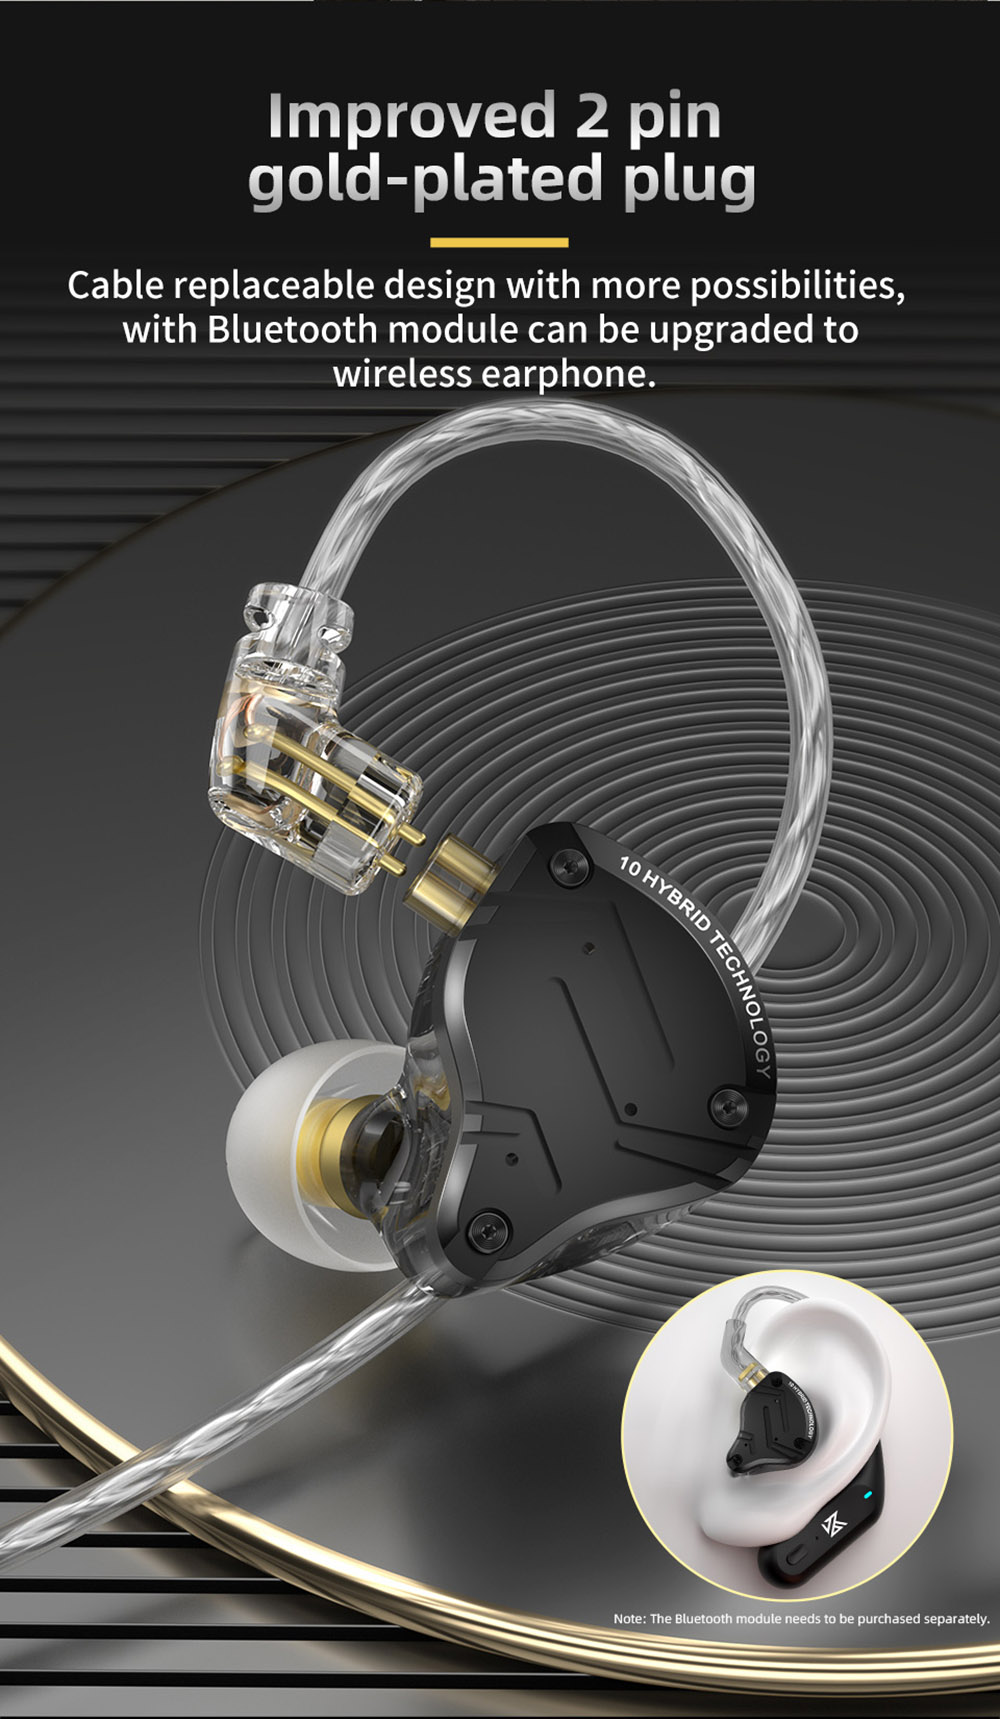 KZ ZS10 Pro X Wired Earphone In-Ear Hybrid Technology for Sports with Microphone